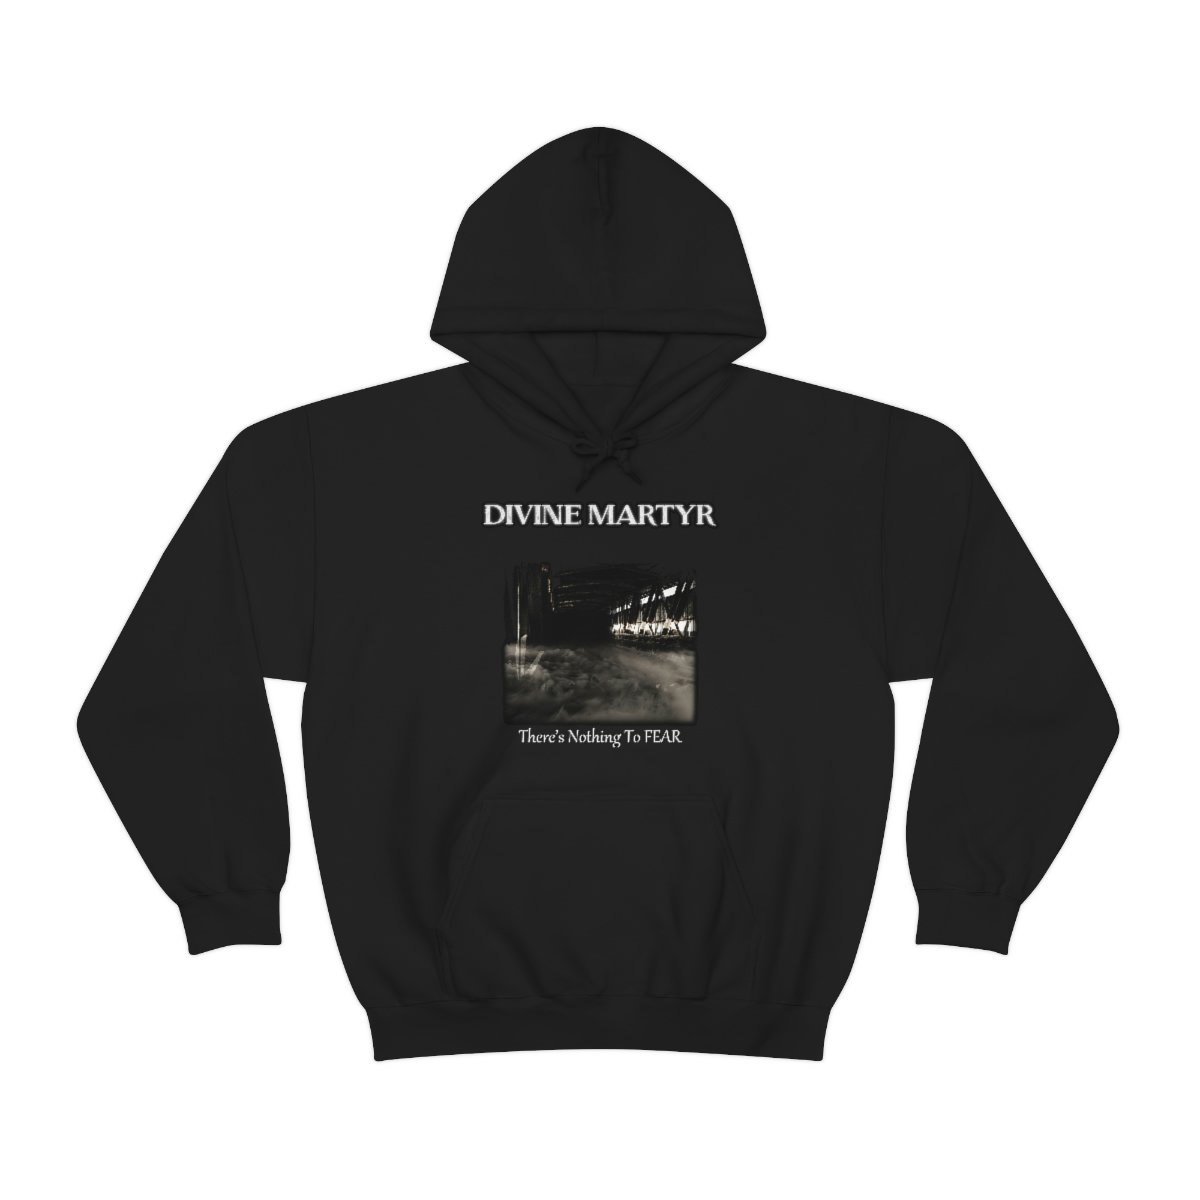 Divine Martyr – There’s Nothing To Fear Pullover Hooded Sweatshirt